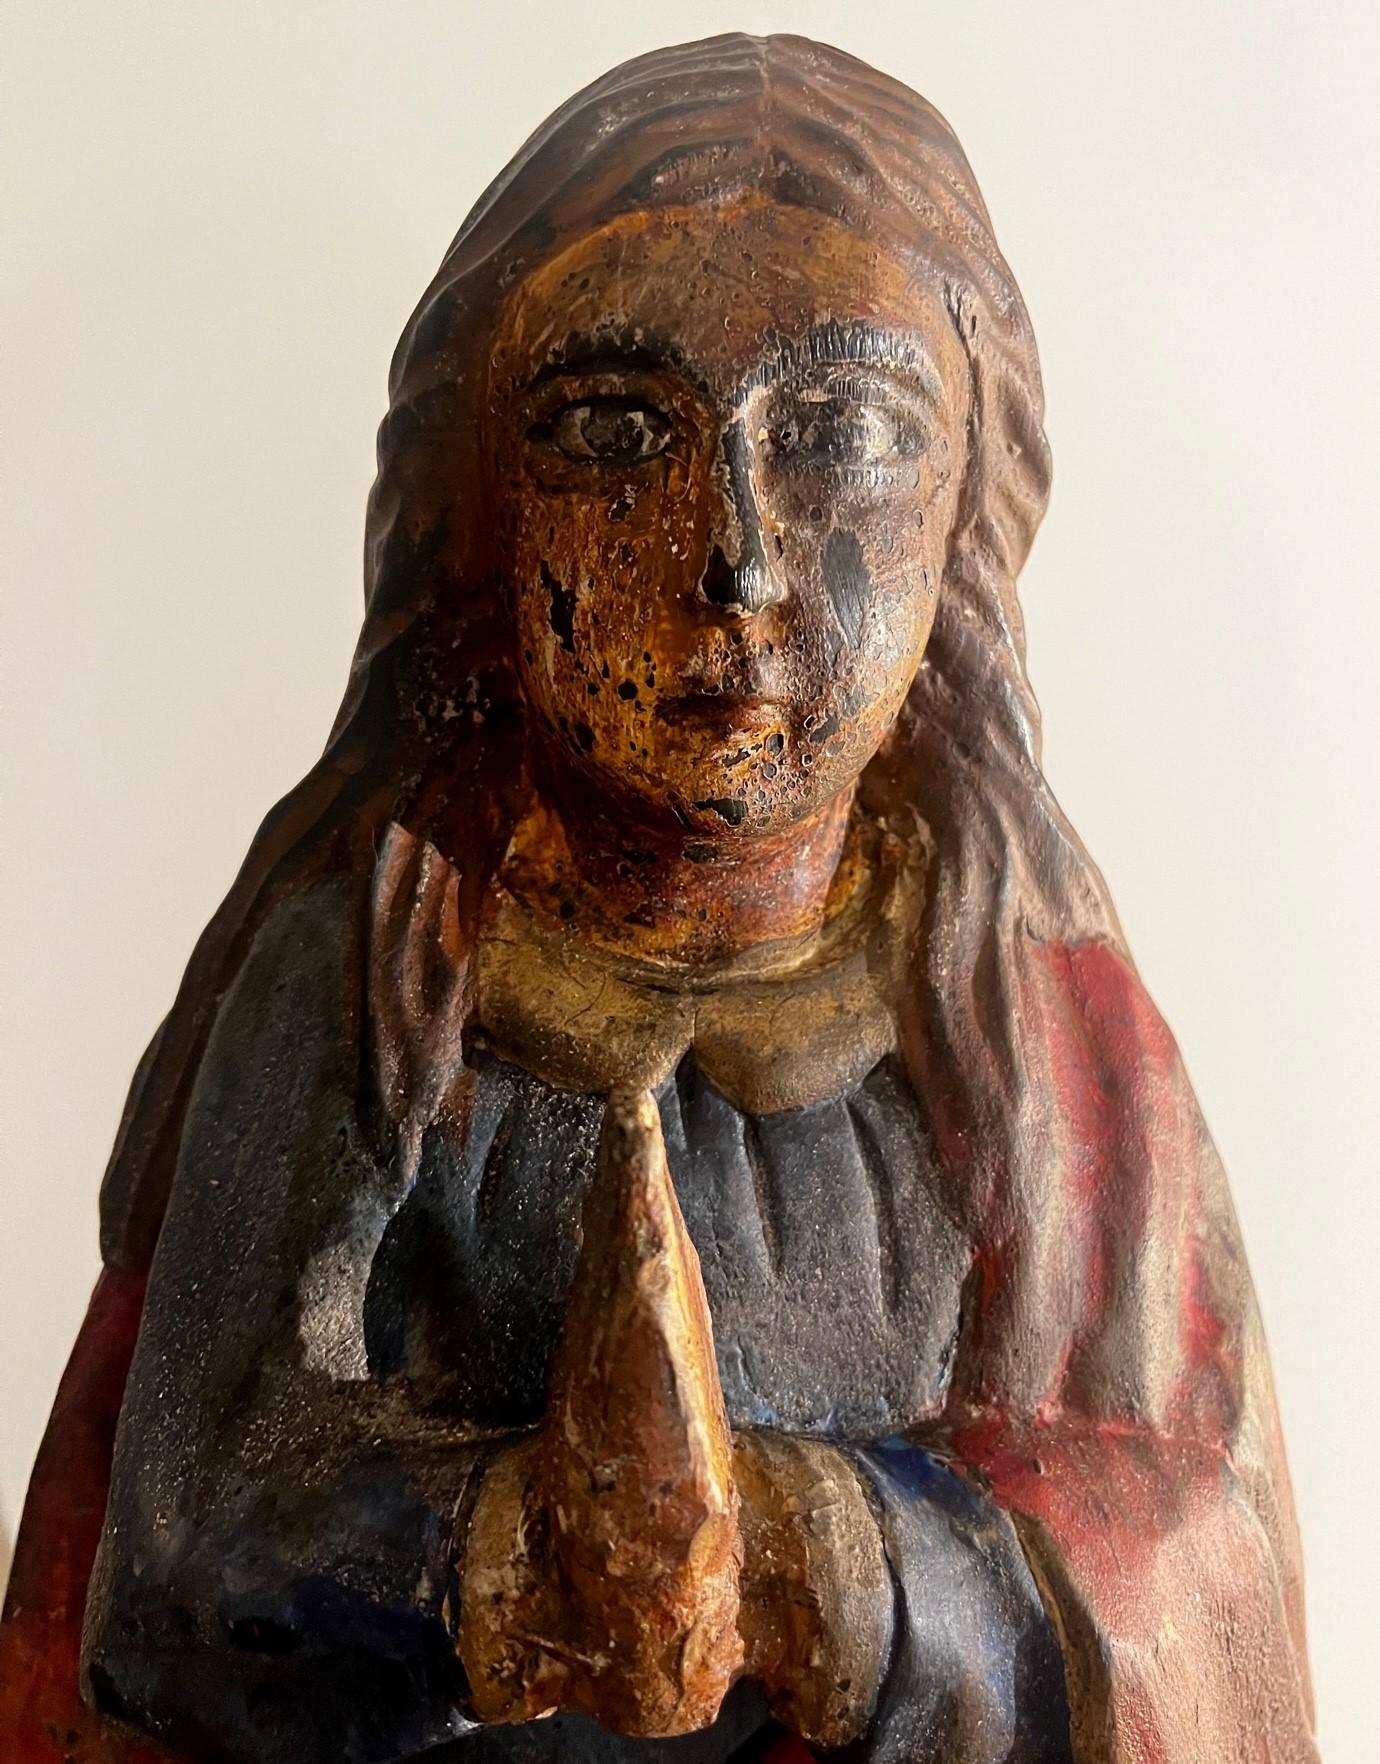 This is an outstanding Italian 18th century carved wood polychromed sculpture of Virgin Mary. The Sculpture is hand painted with some remains of a gold gilt in few places and originated until lately in a private Villa in Tuscany (Italy). The colors